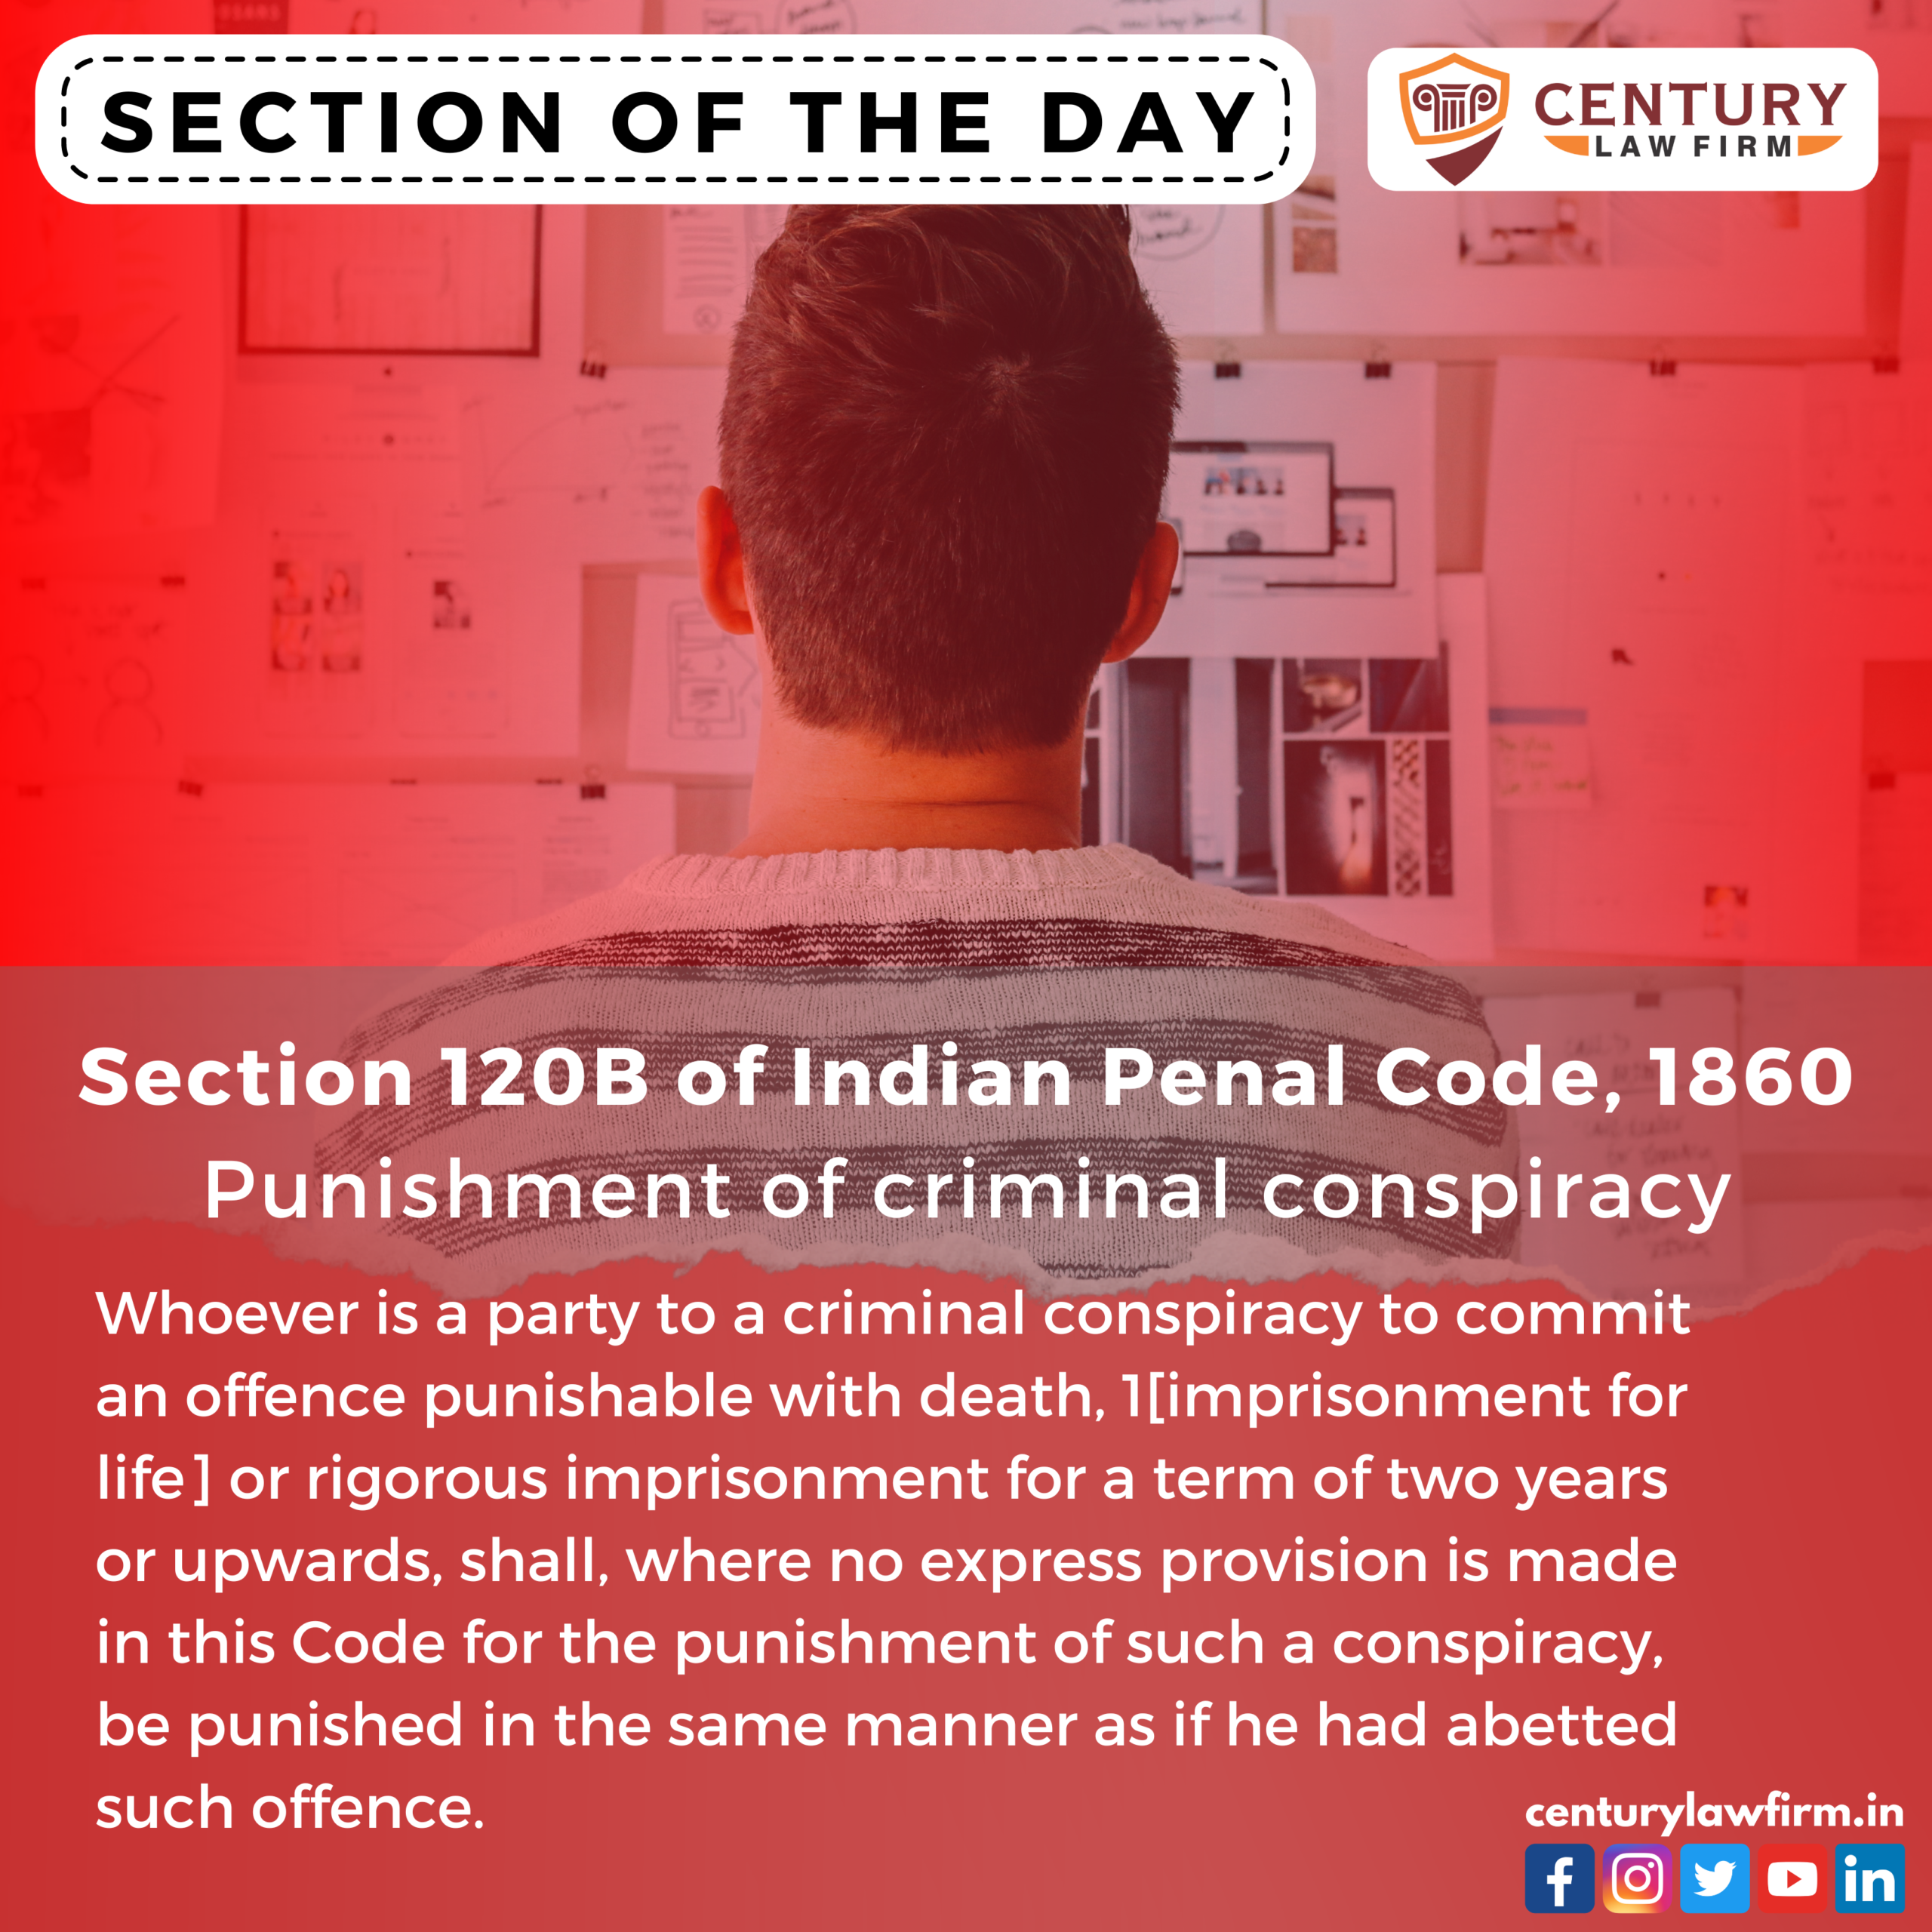 Section 120B of The Indian Penal Code, 1860 - Punishment of criminal conspiracy | IPC Century Law Firm